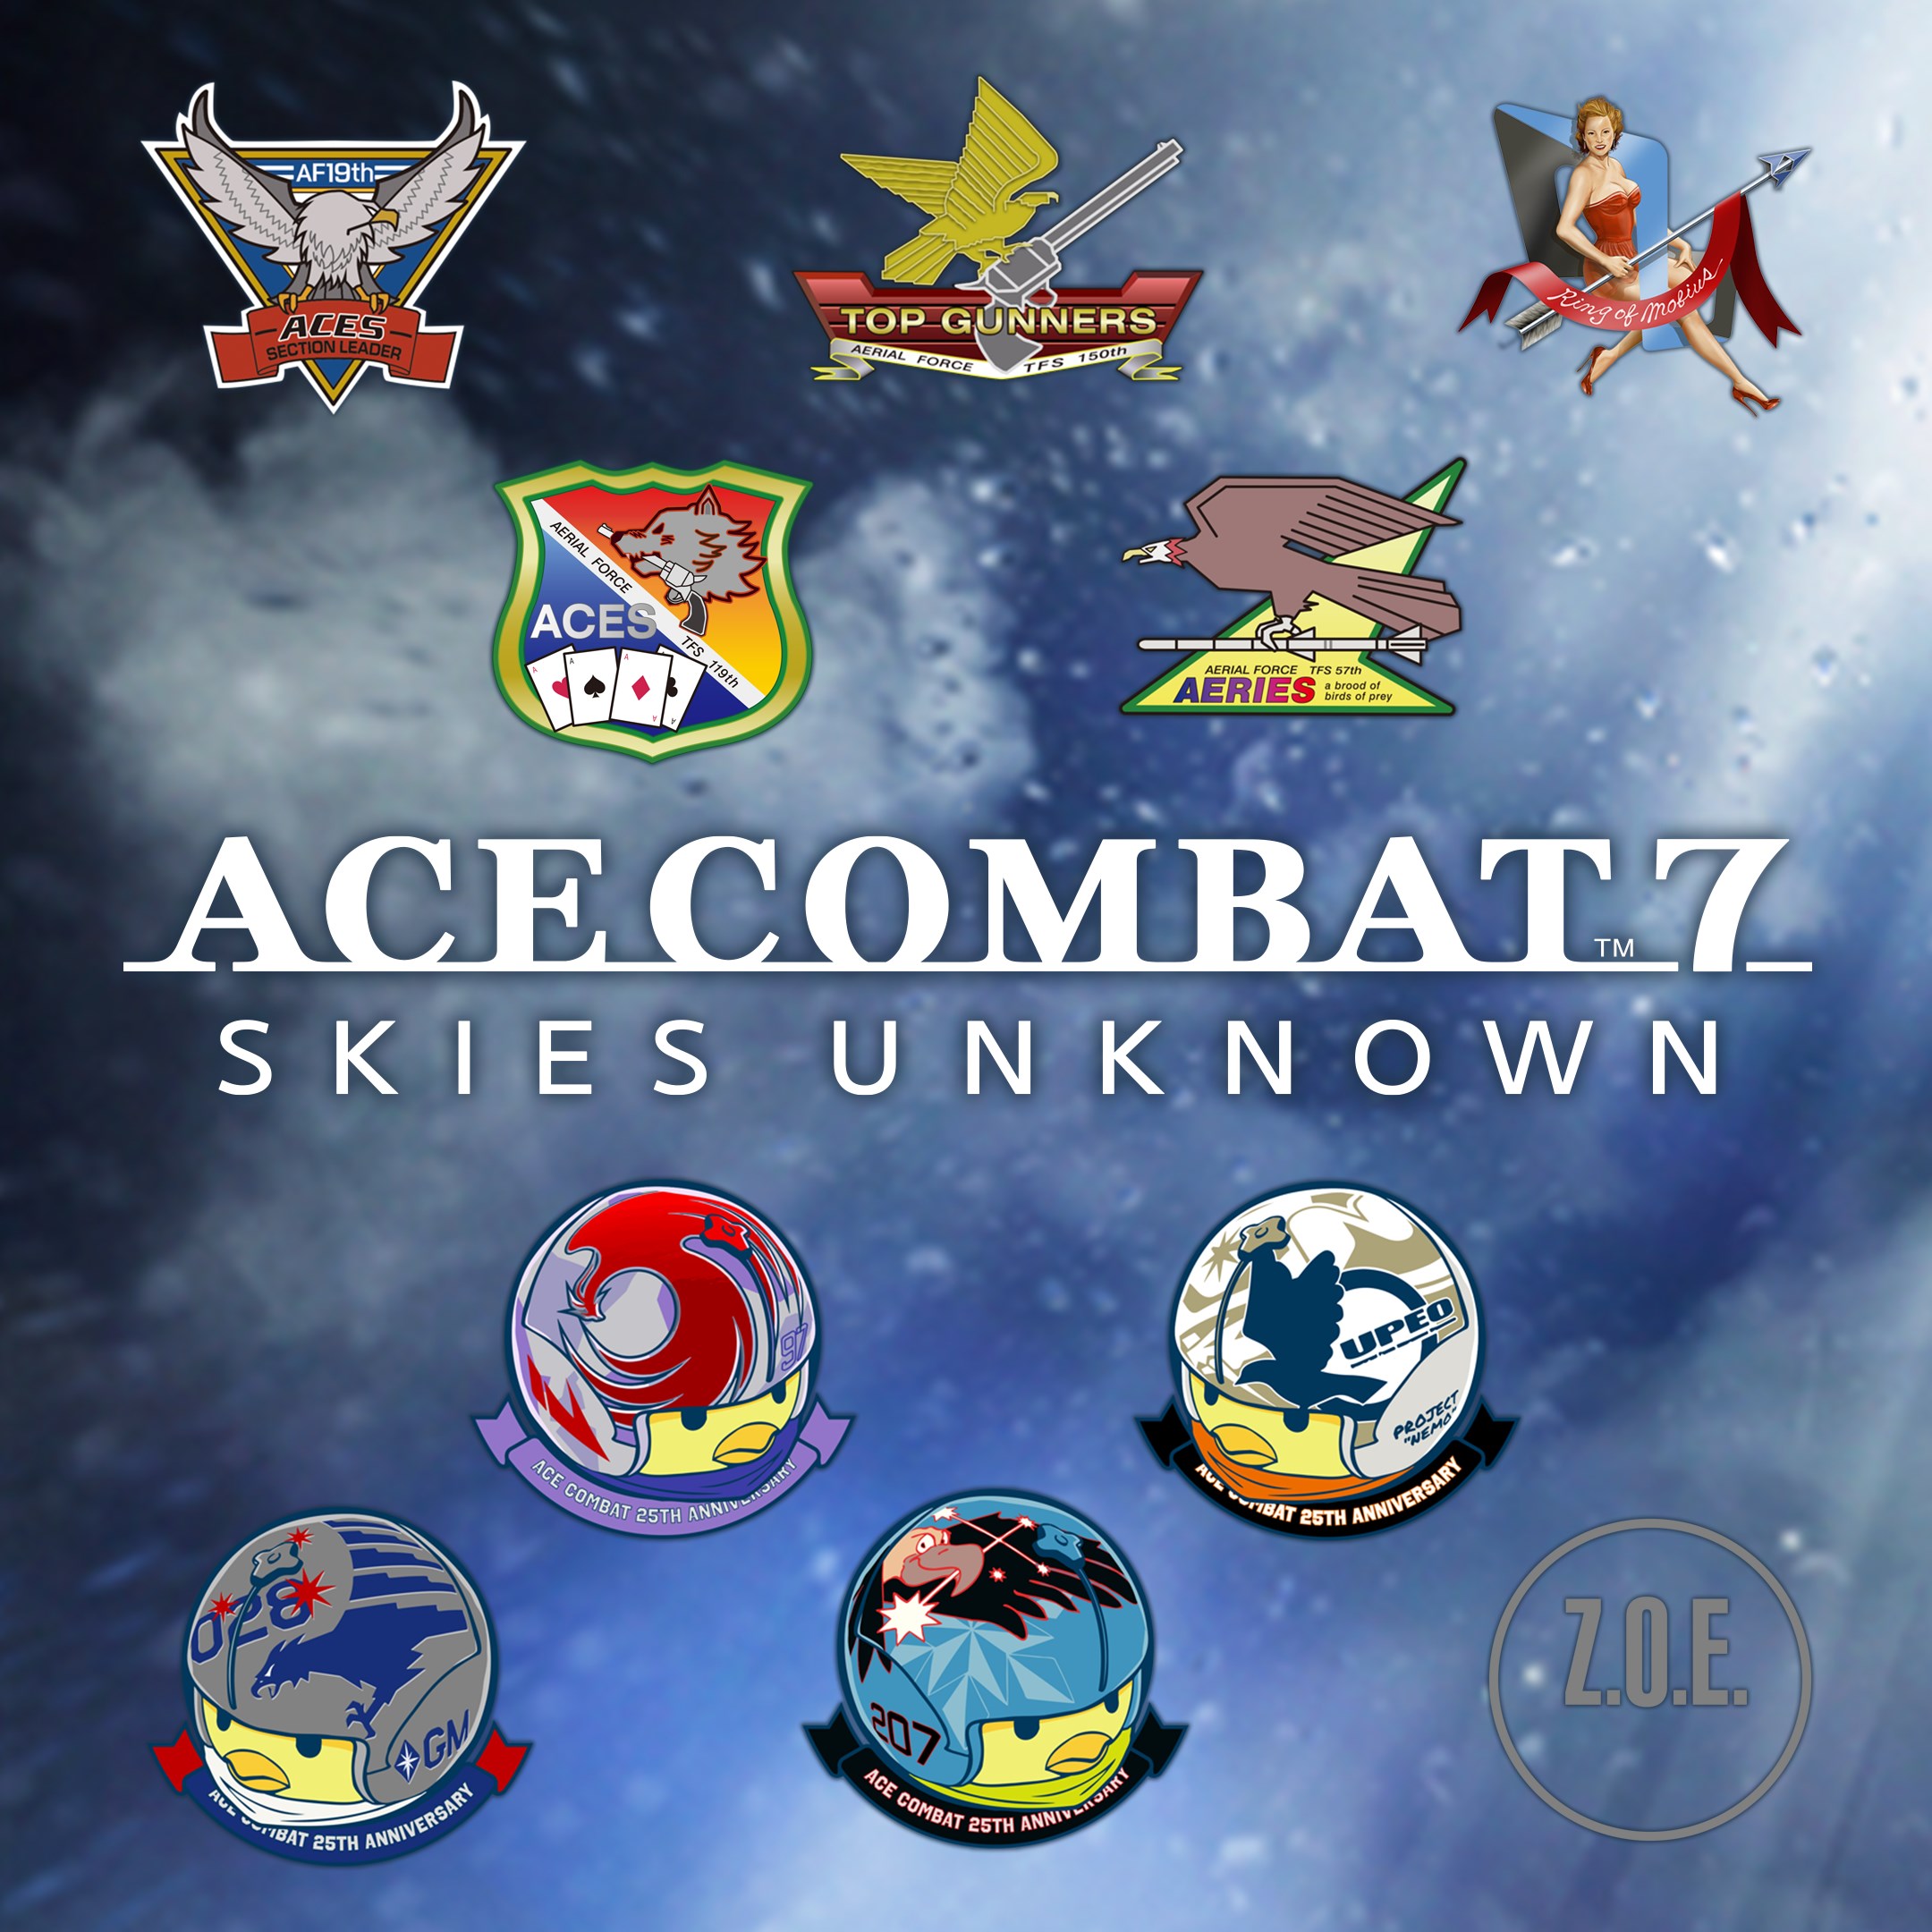 ACE COMBAT™ 7: SKIES UNKNOWN - 25週年紀念徽章組合包 III